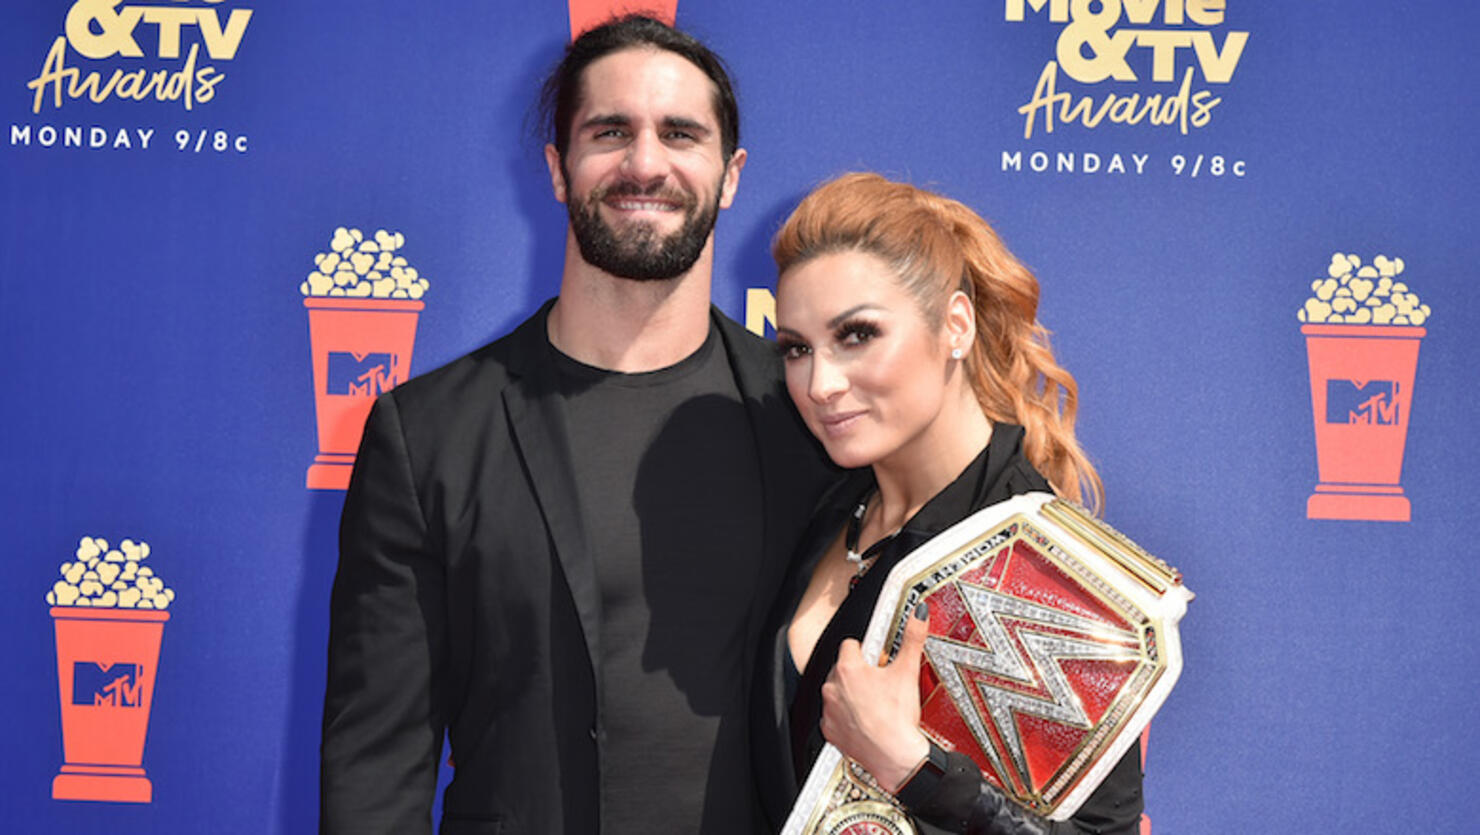 Seth Rollins, Becky Lynch Want to Face These Sports Stars in WWE